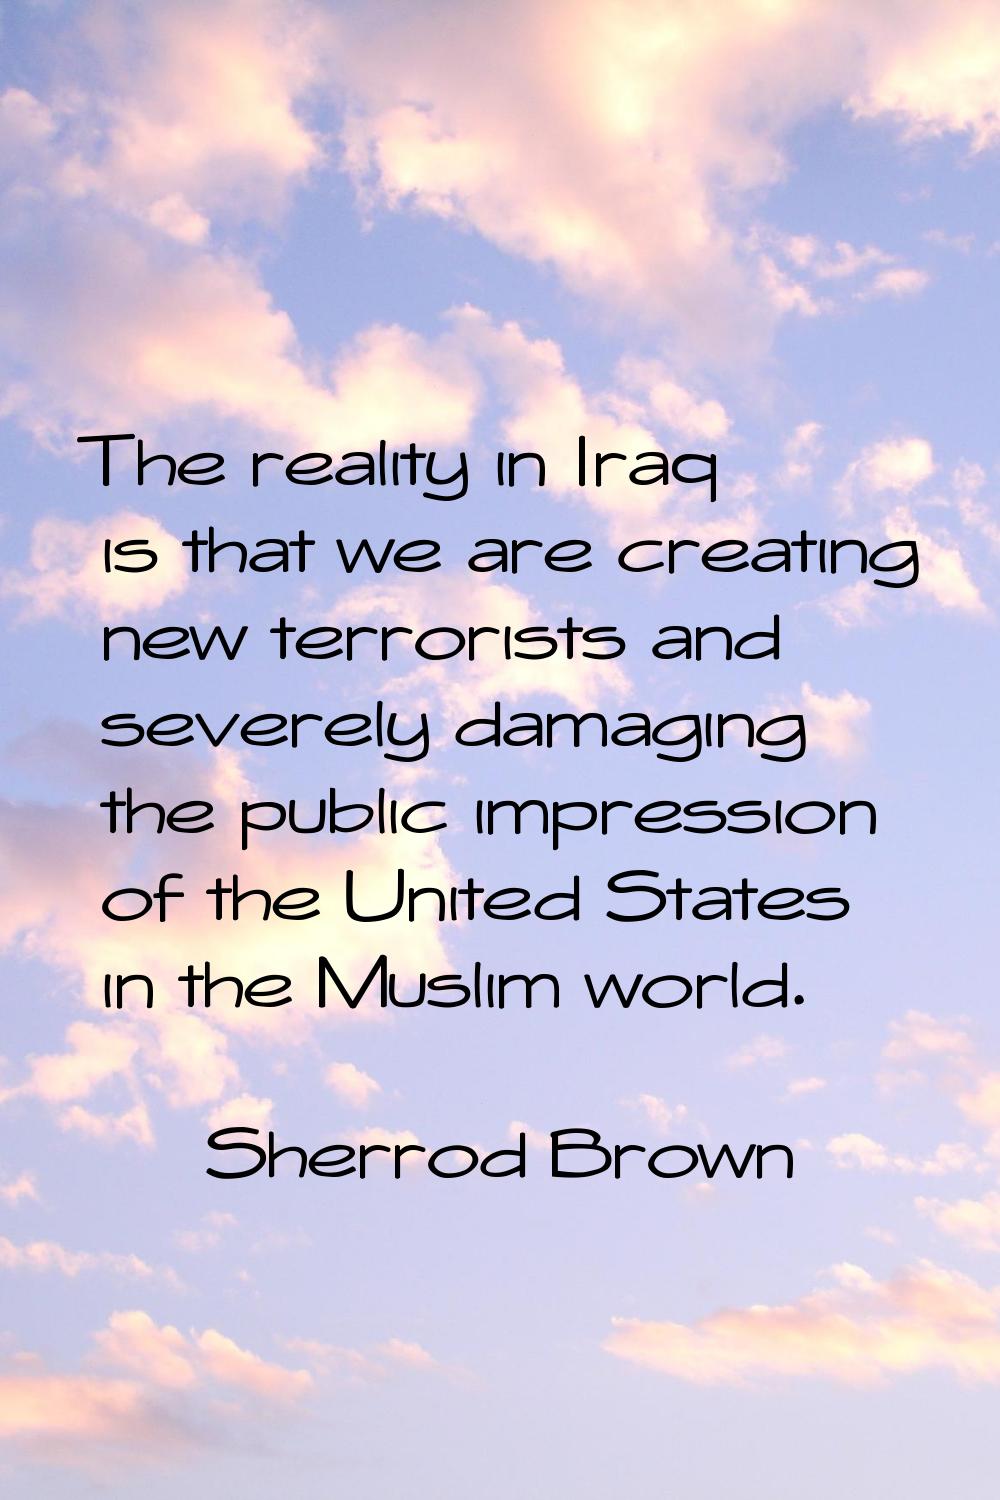 The reality in Iraq is that we are creating new terrorists and severely damaging the public impress